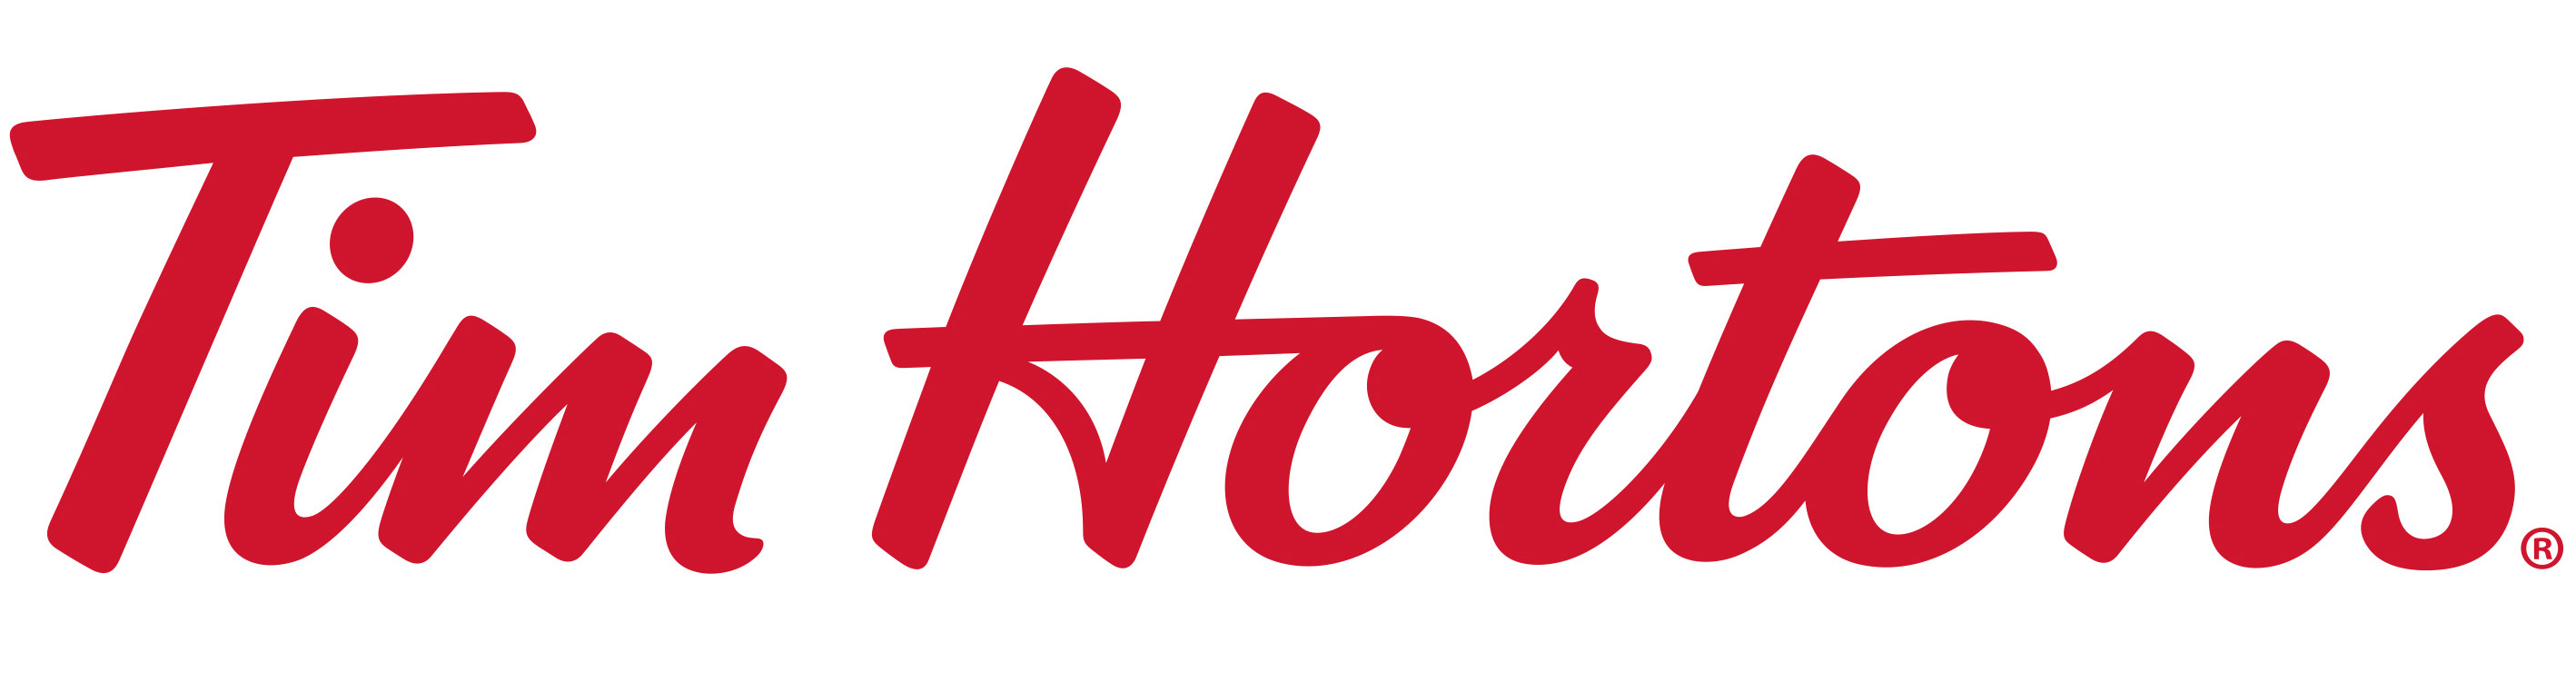 The Time Hortons logo - Tim Hortons written in red cursive writing.